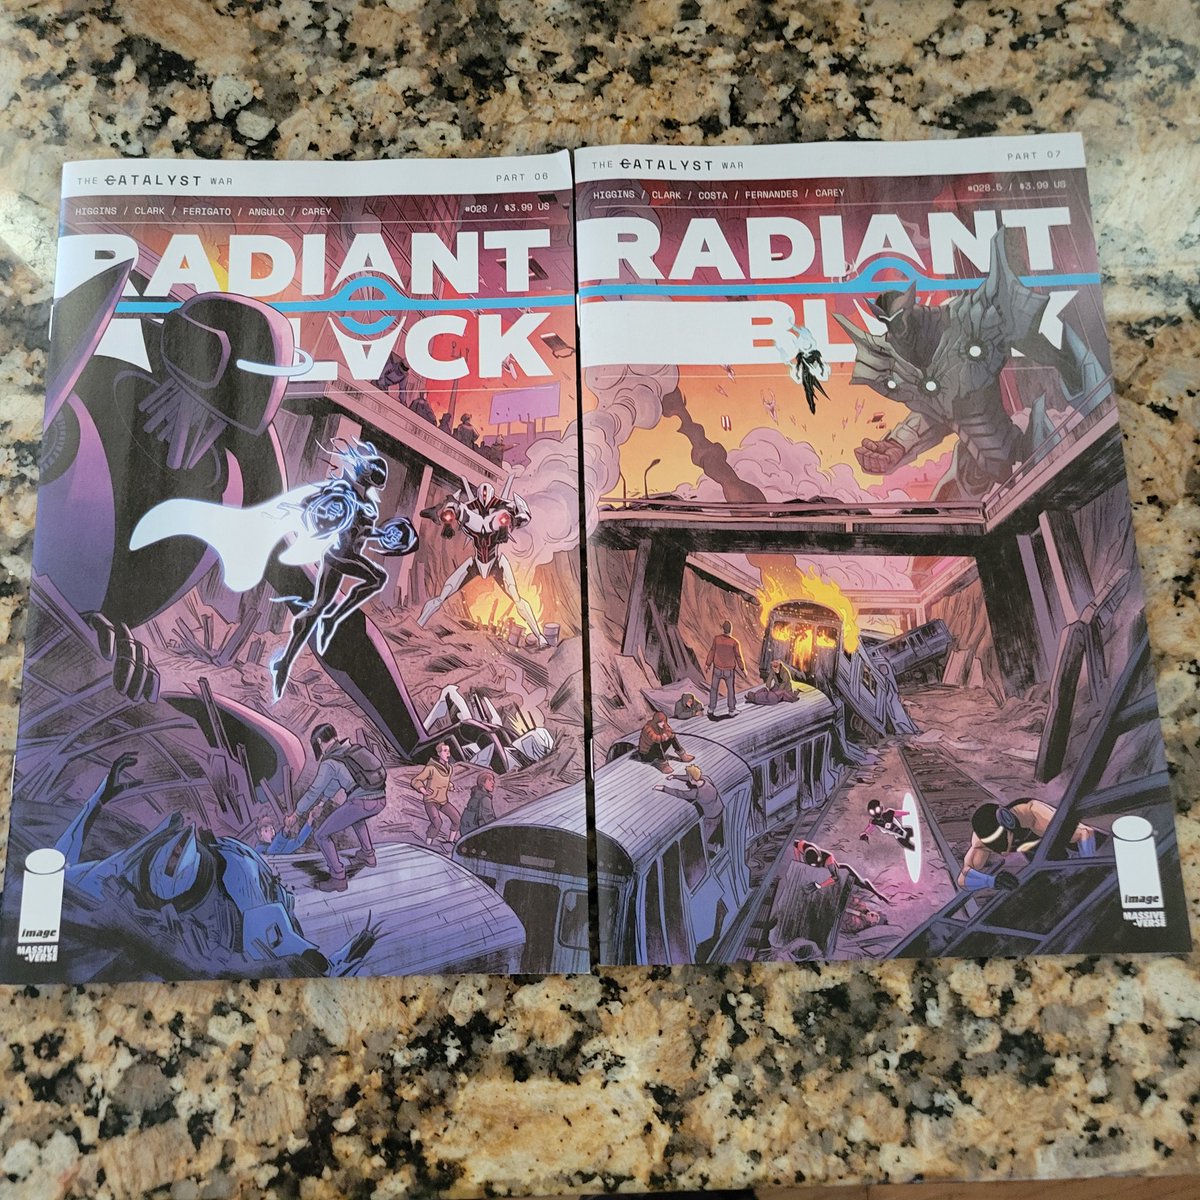 #spoilerfree review of the #massiveverse Radiant Black next issues, the catalyst war is getting explosive in more ways than one & boy get your tissues ready cause you're not prepared for what is next!! #radiantblack #imagecomics #catalystwar